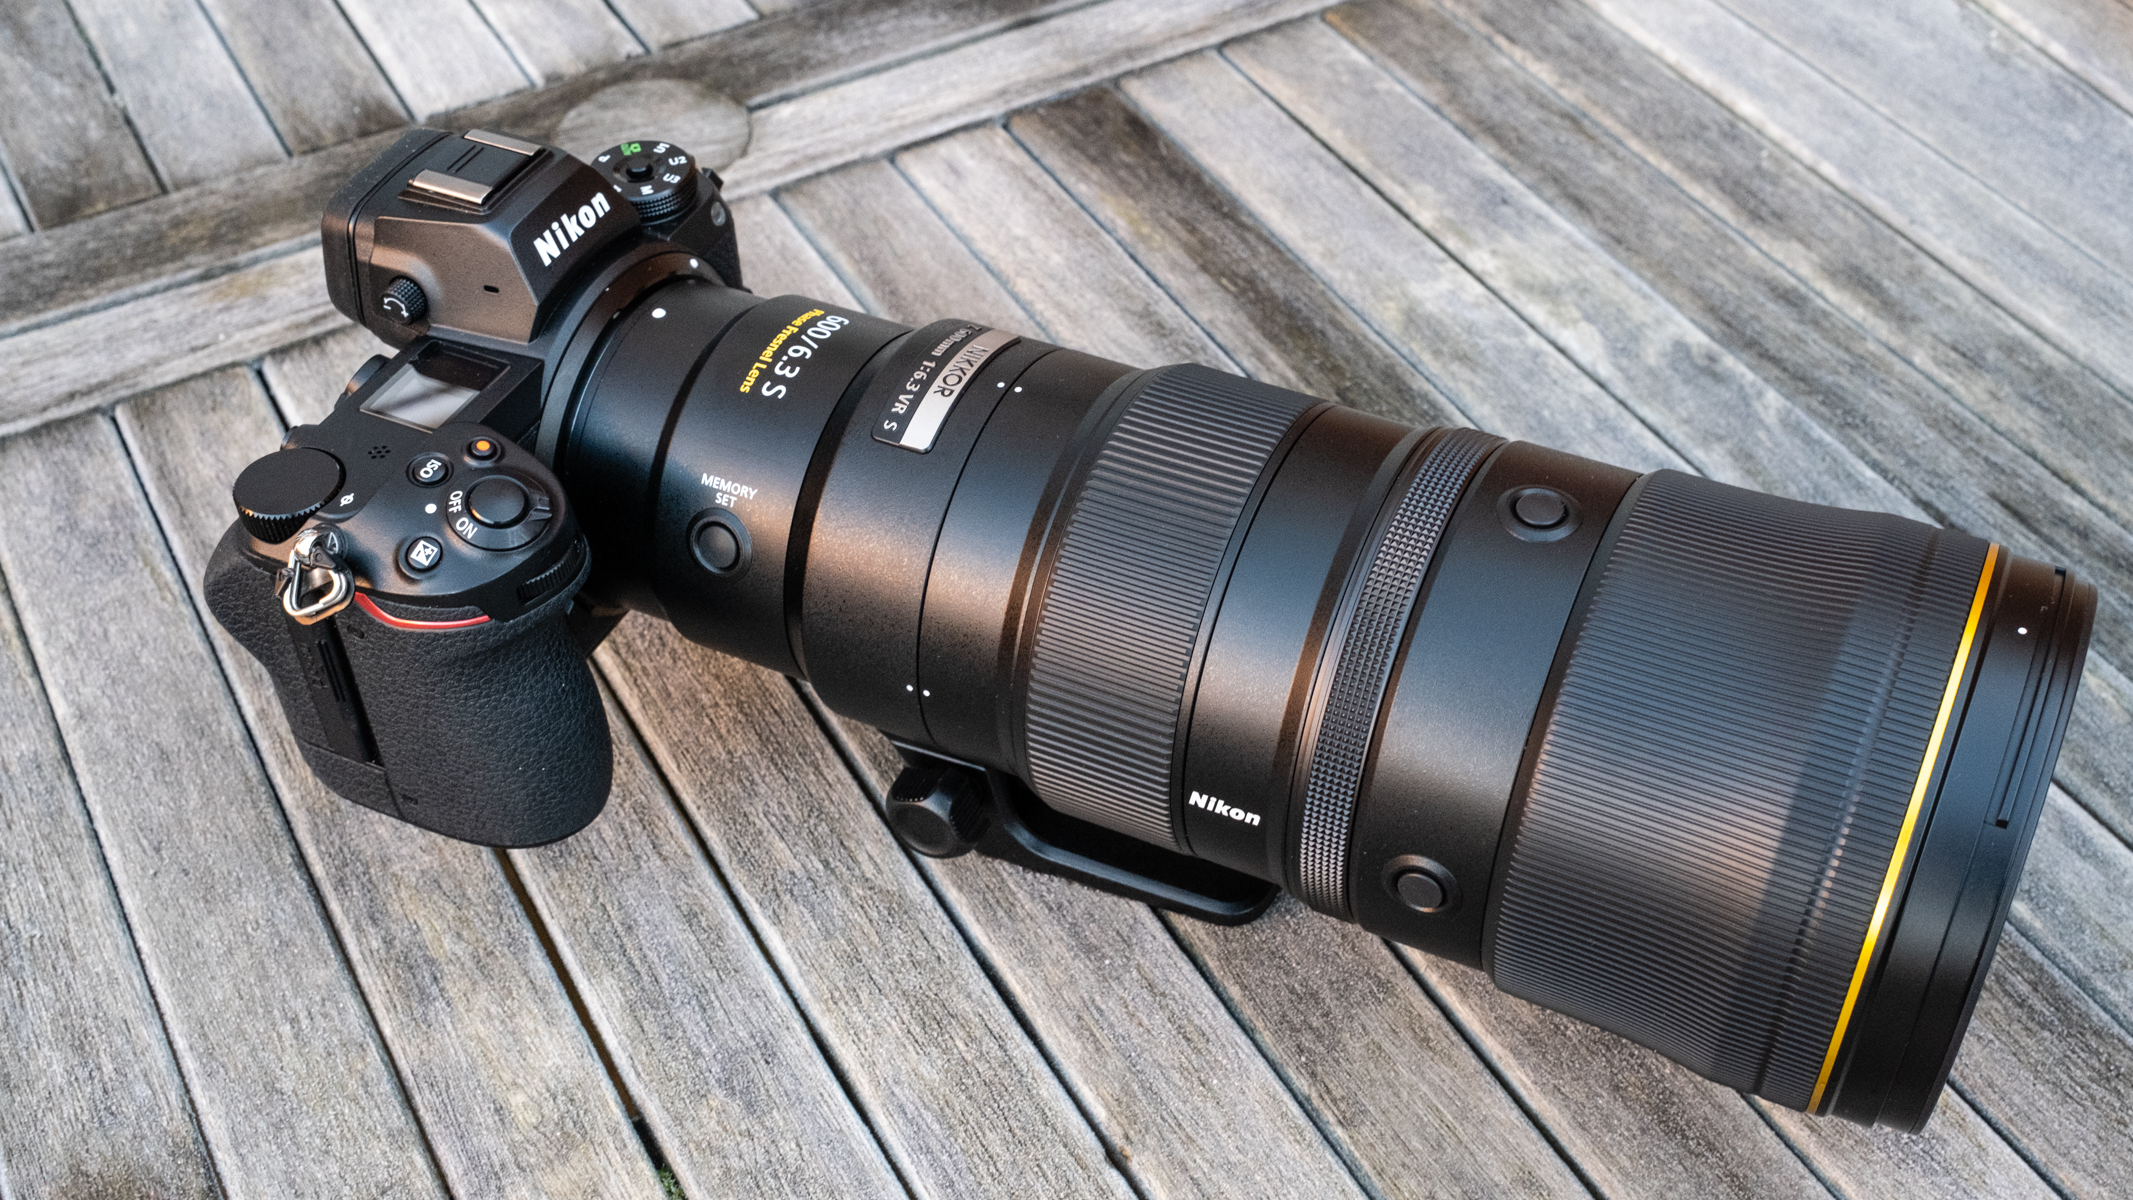 Nikkor Z 600mm f/6.3 VR S  attached to a Nikon Z 7II on a frosty wooden table